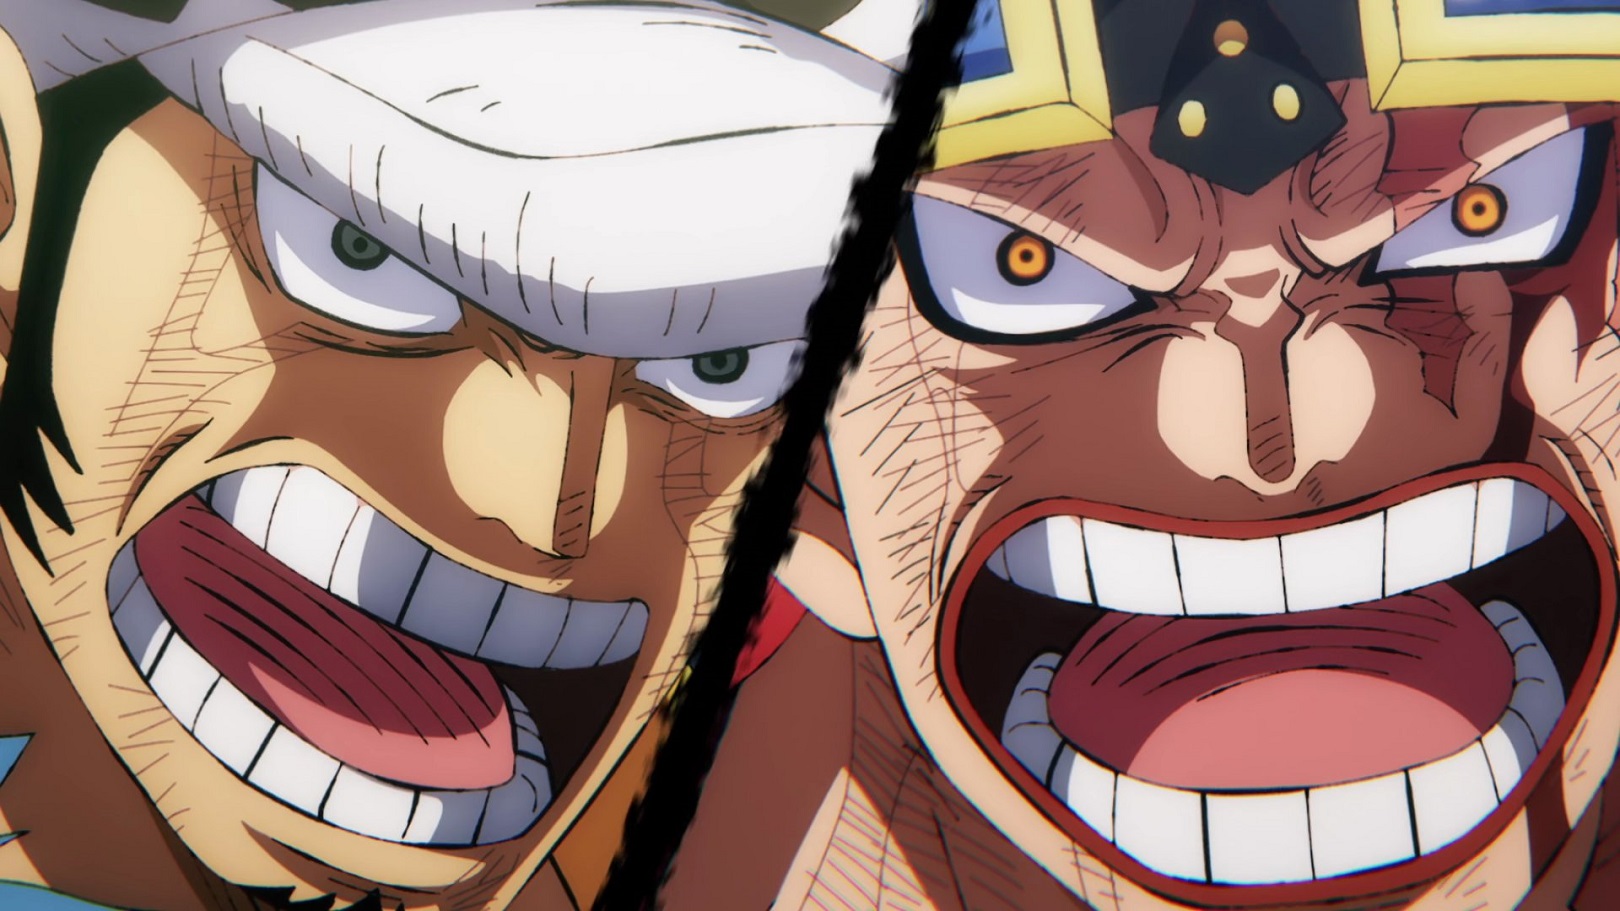 Watch One Piece Episode 1065: The Epic Joint Attack of Trafalgar Law and Eustass Kid on Big Mom